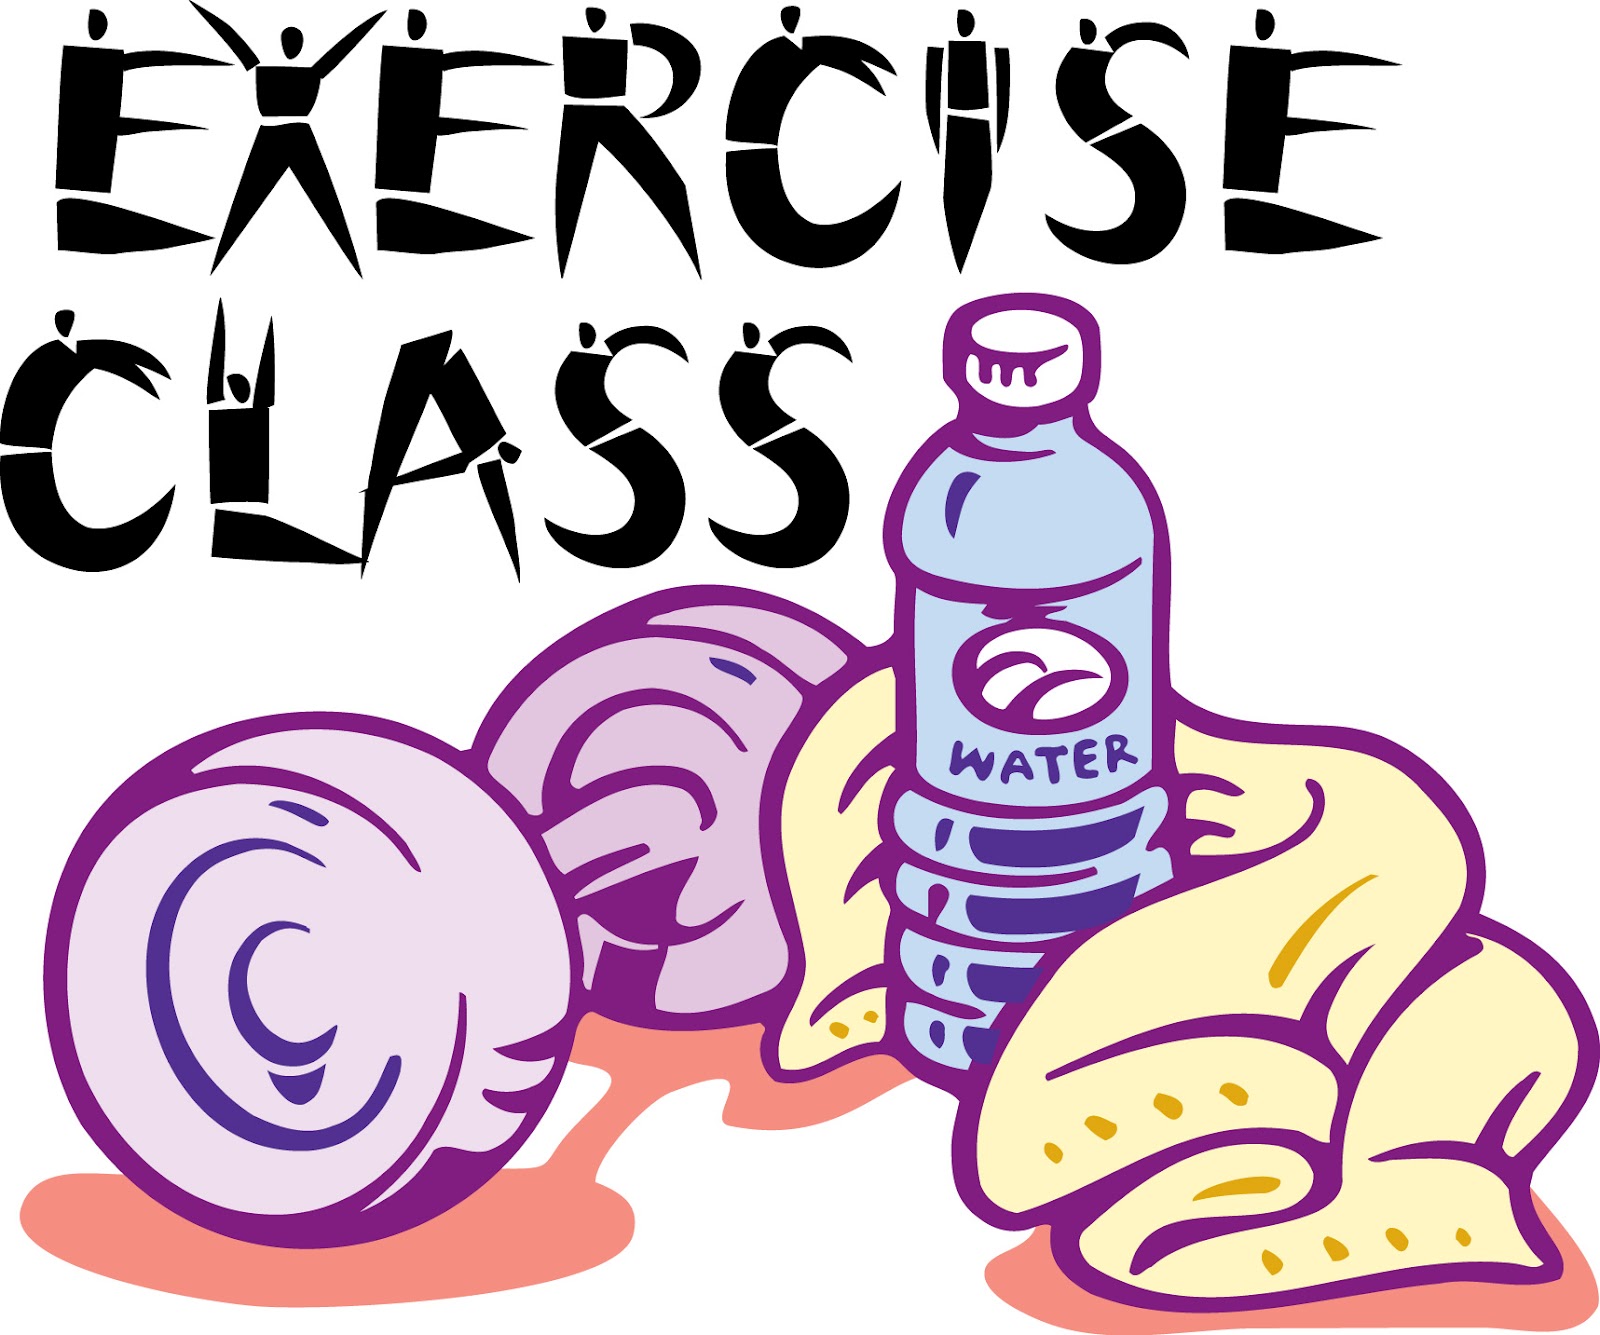 Exercise class clipart 